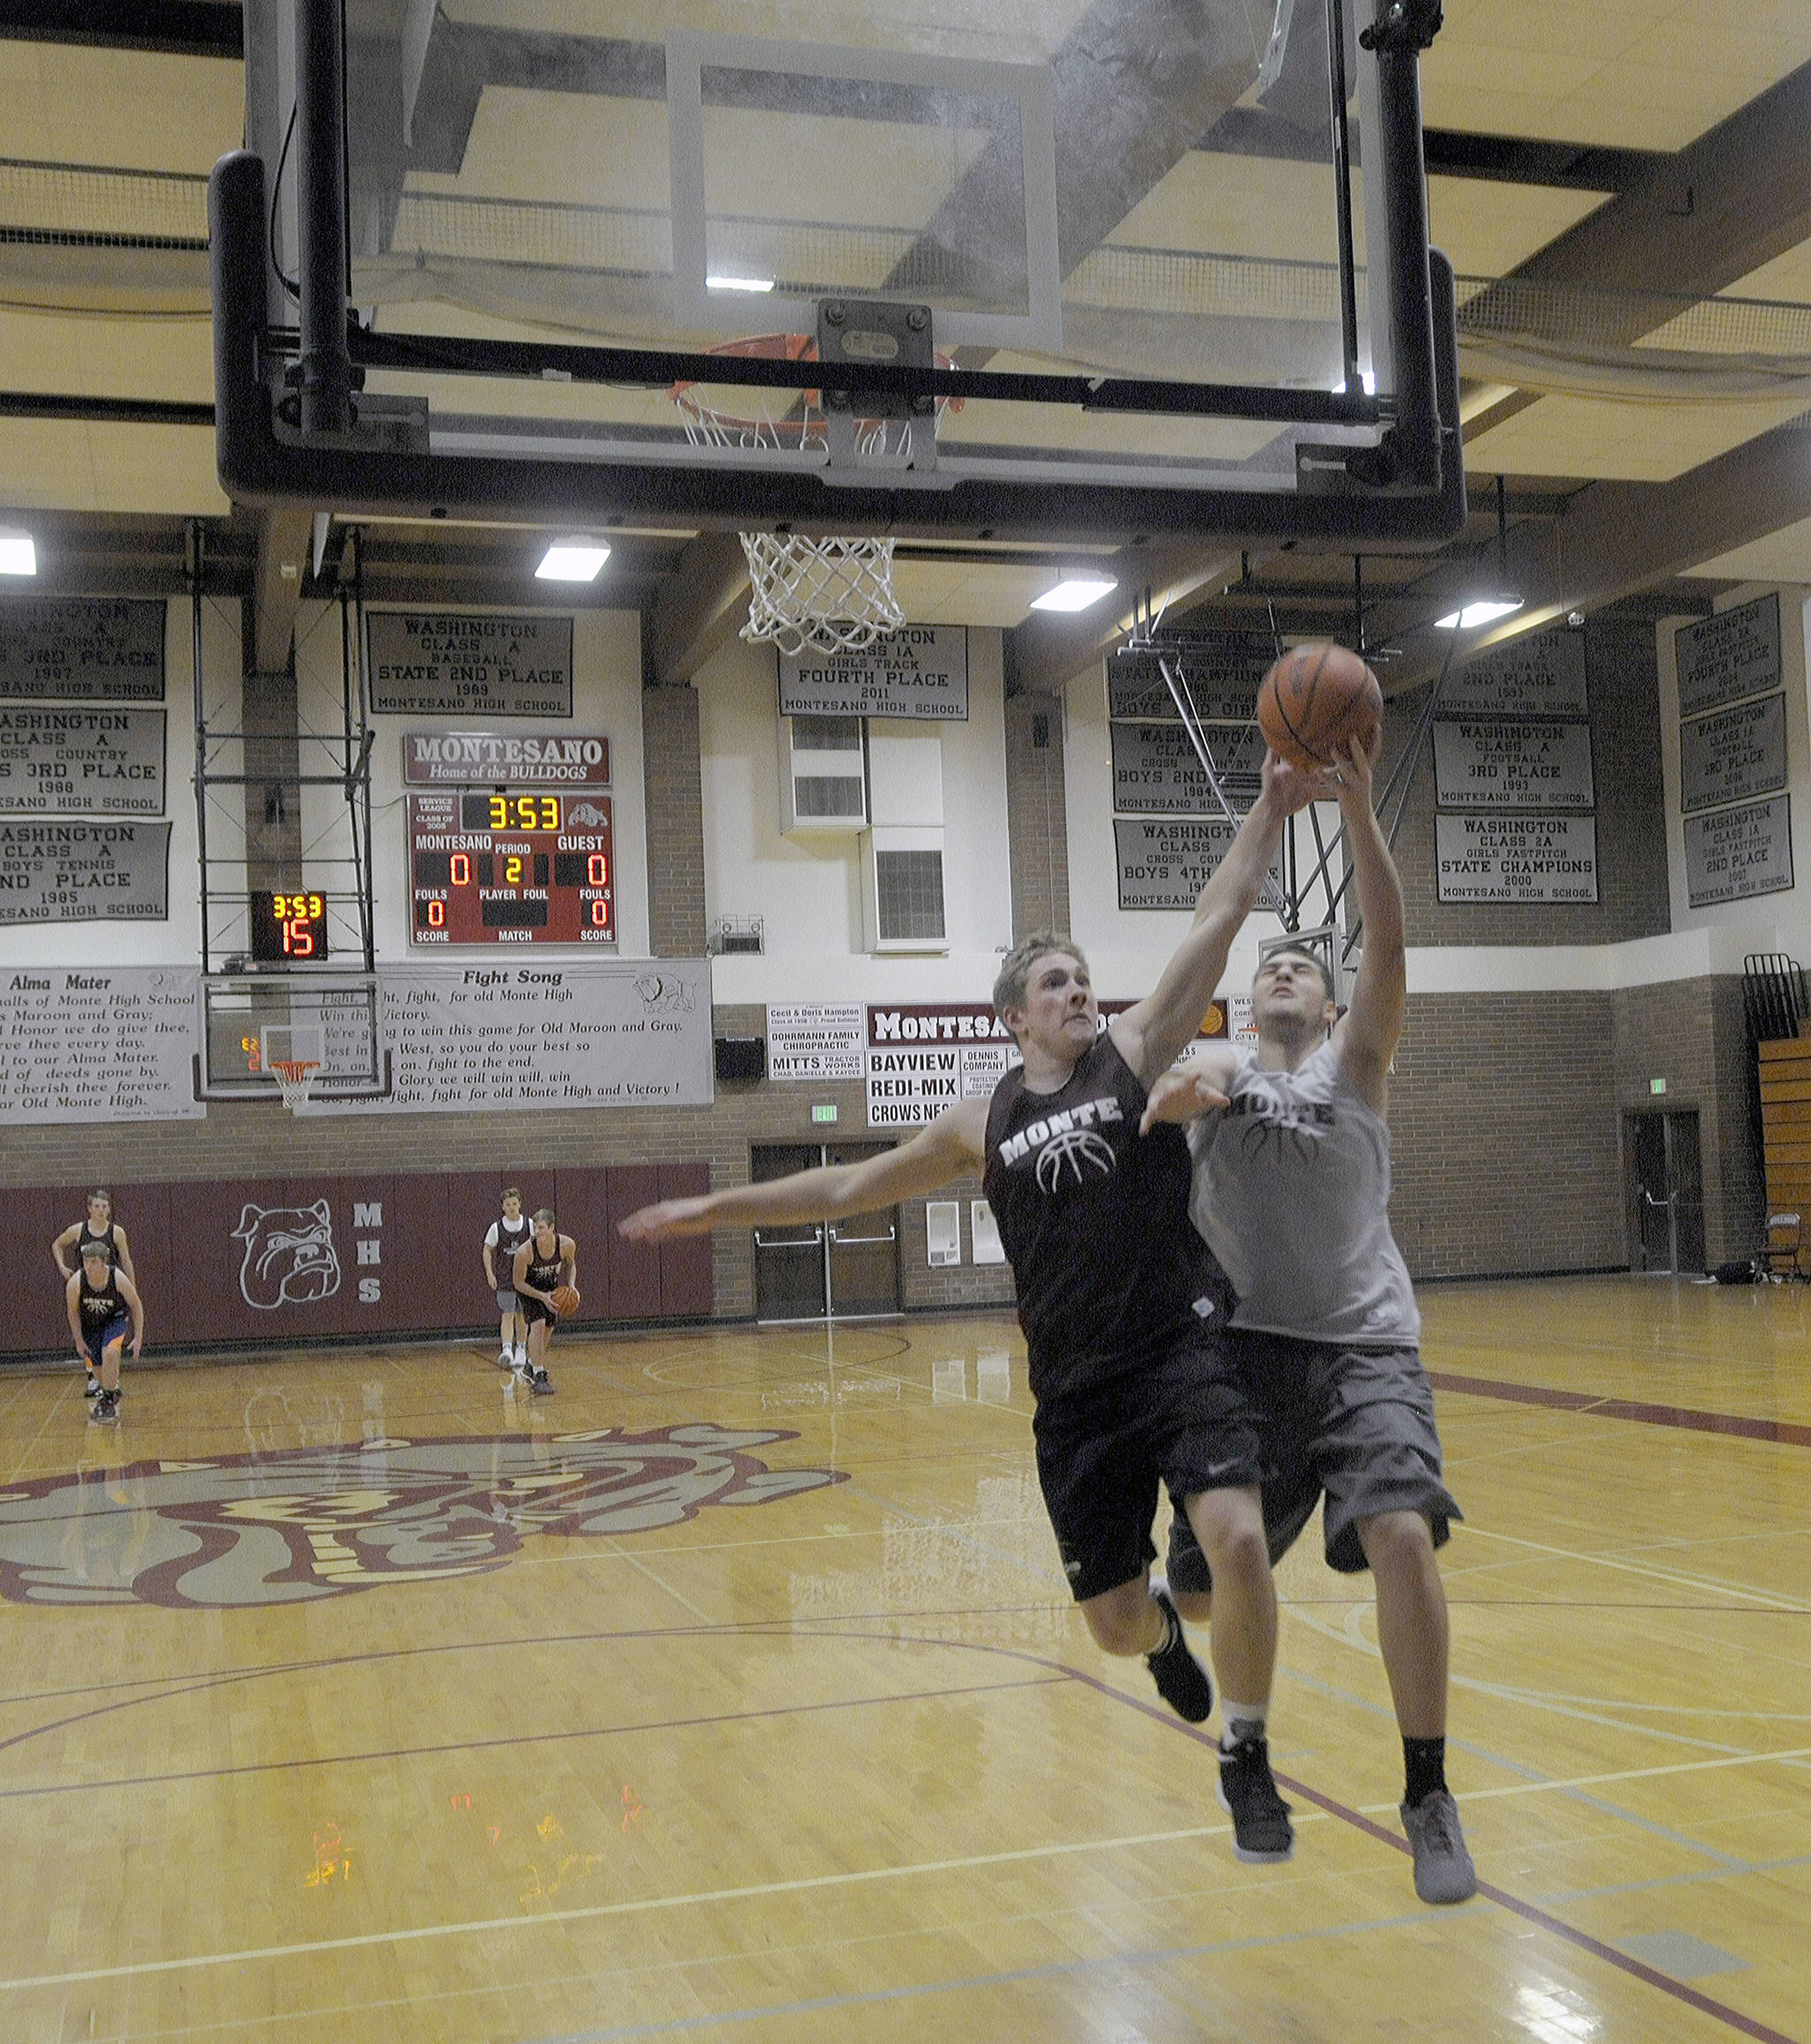 Seth Dierkop, left, contests a shot from Tanner Nicklas during a drill in practice.